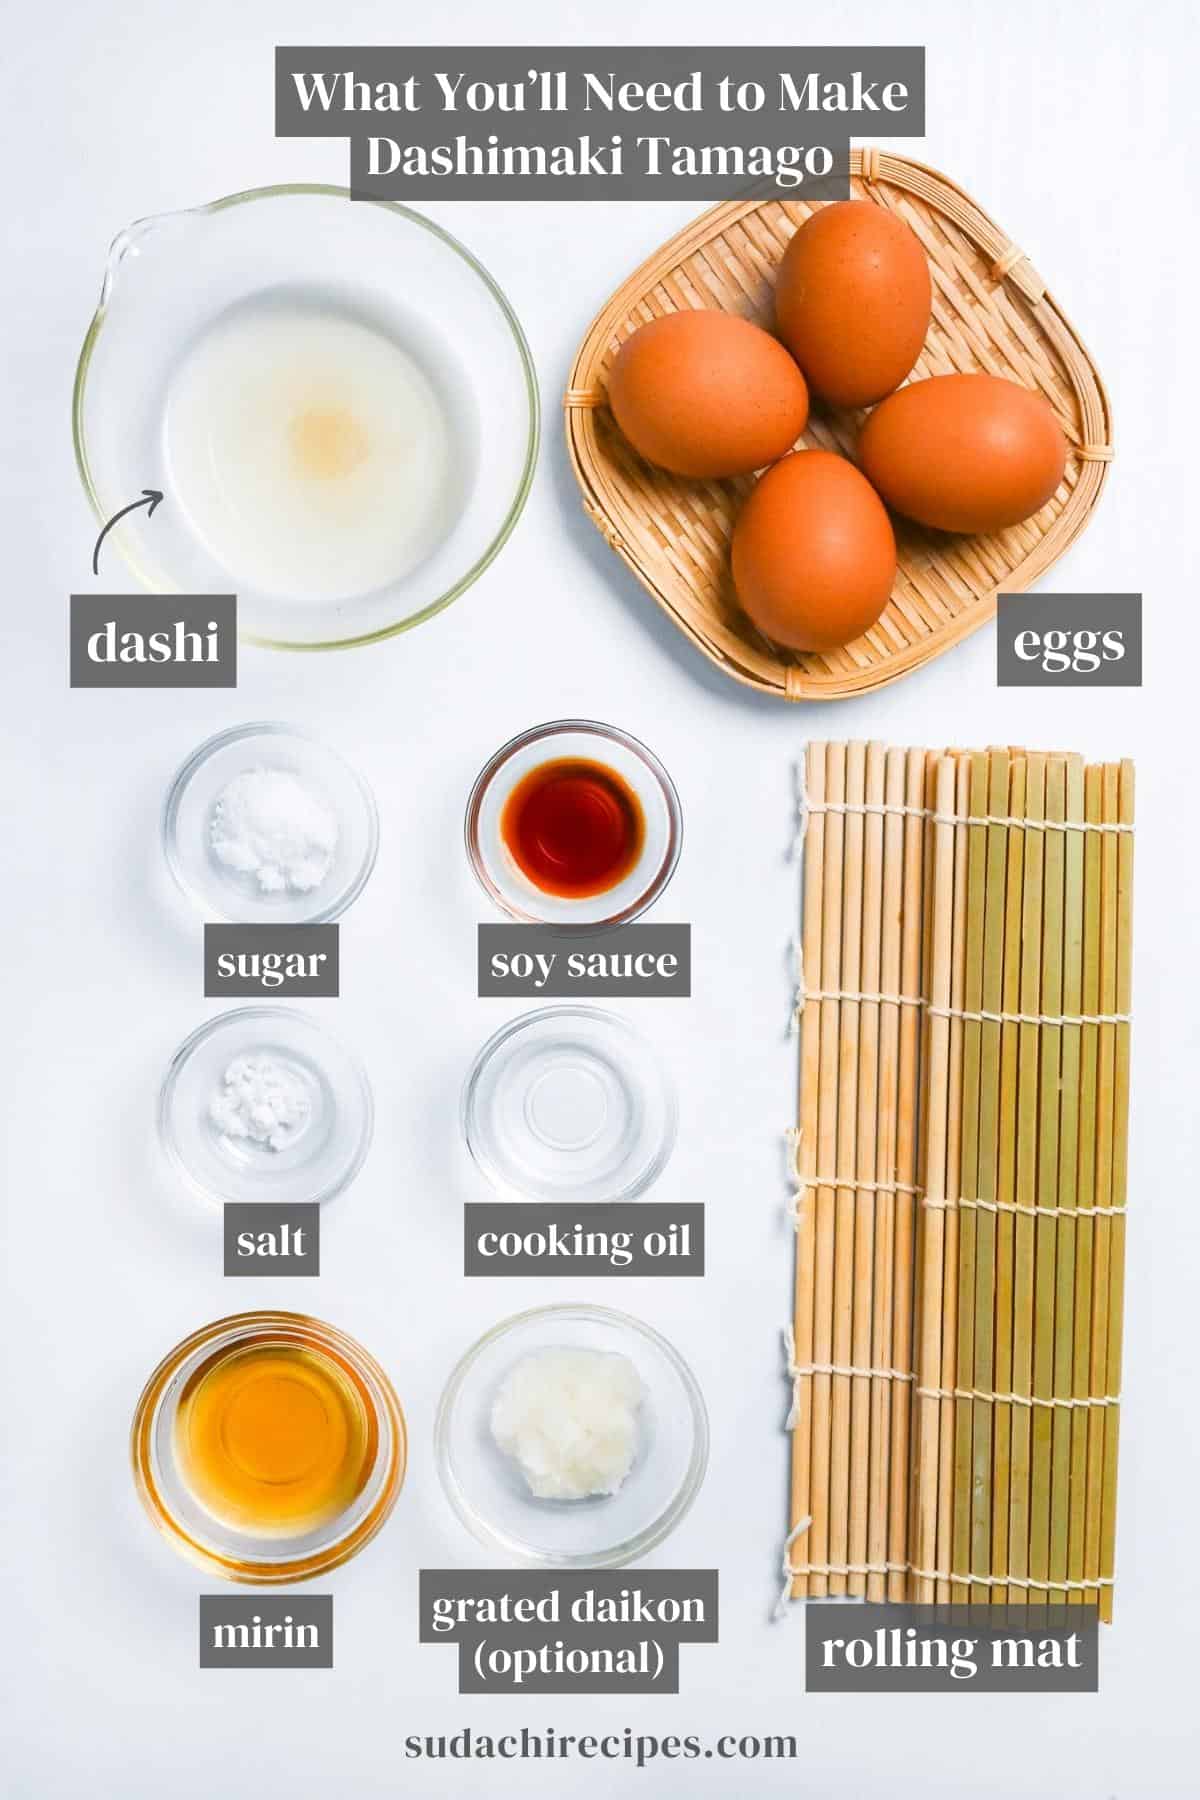 ingredients used to make dashimaki tamago on a white background with labels